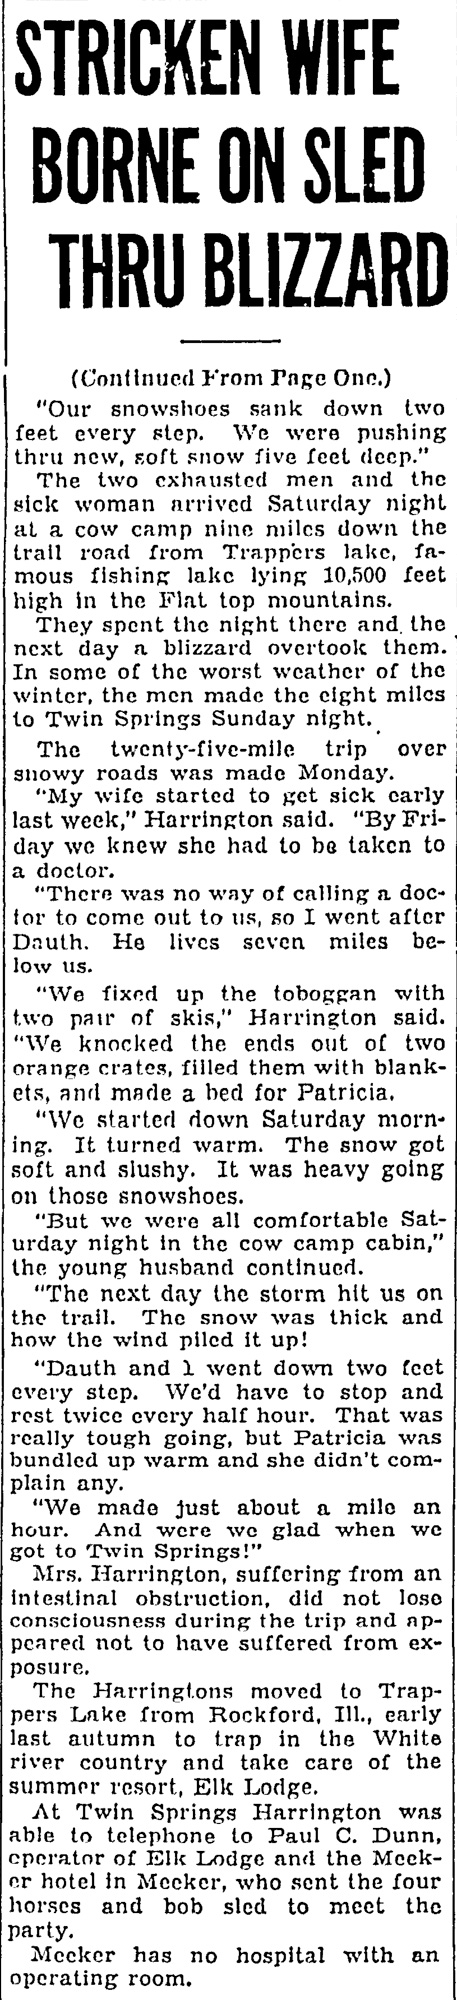 Dauth Family Archive - 1939-02-21 - Denver Post - Fred Dauth Helps Save A Sick Person During Blizzard - Part 1